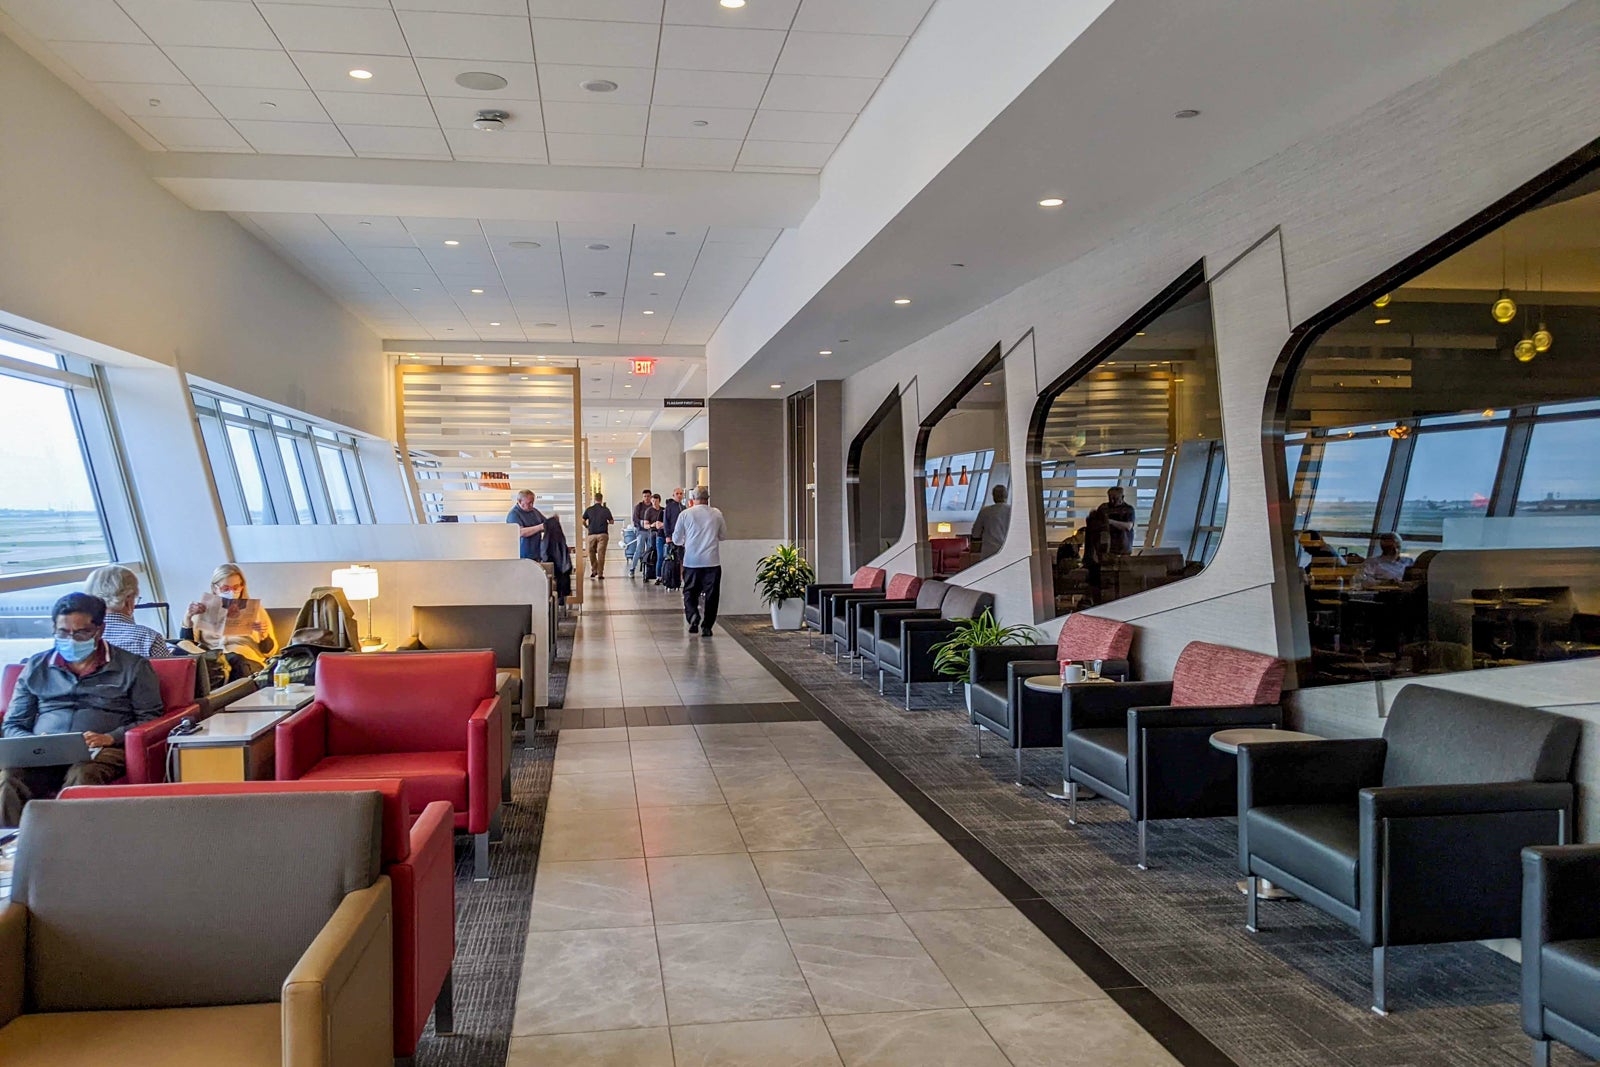 DFW American Airlines Flagship Lounge